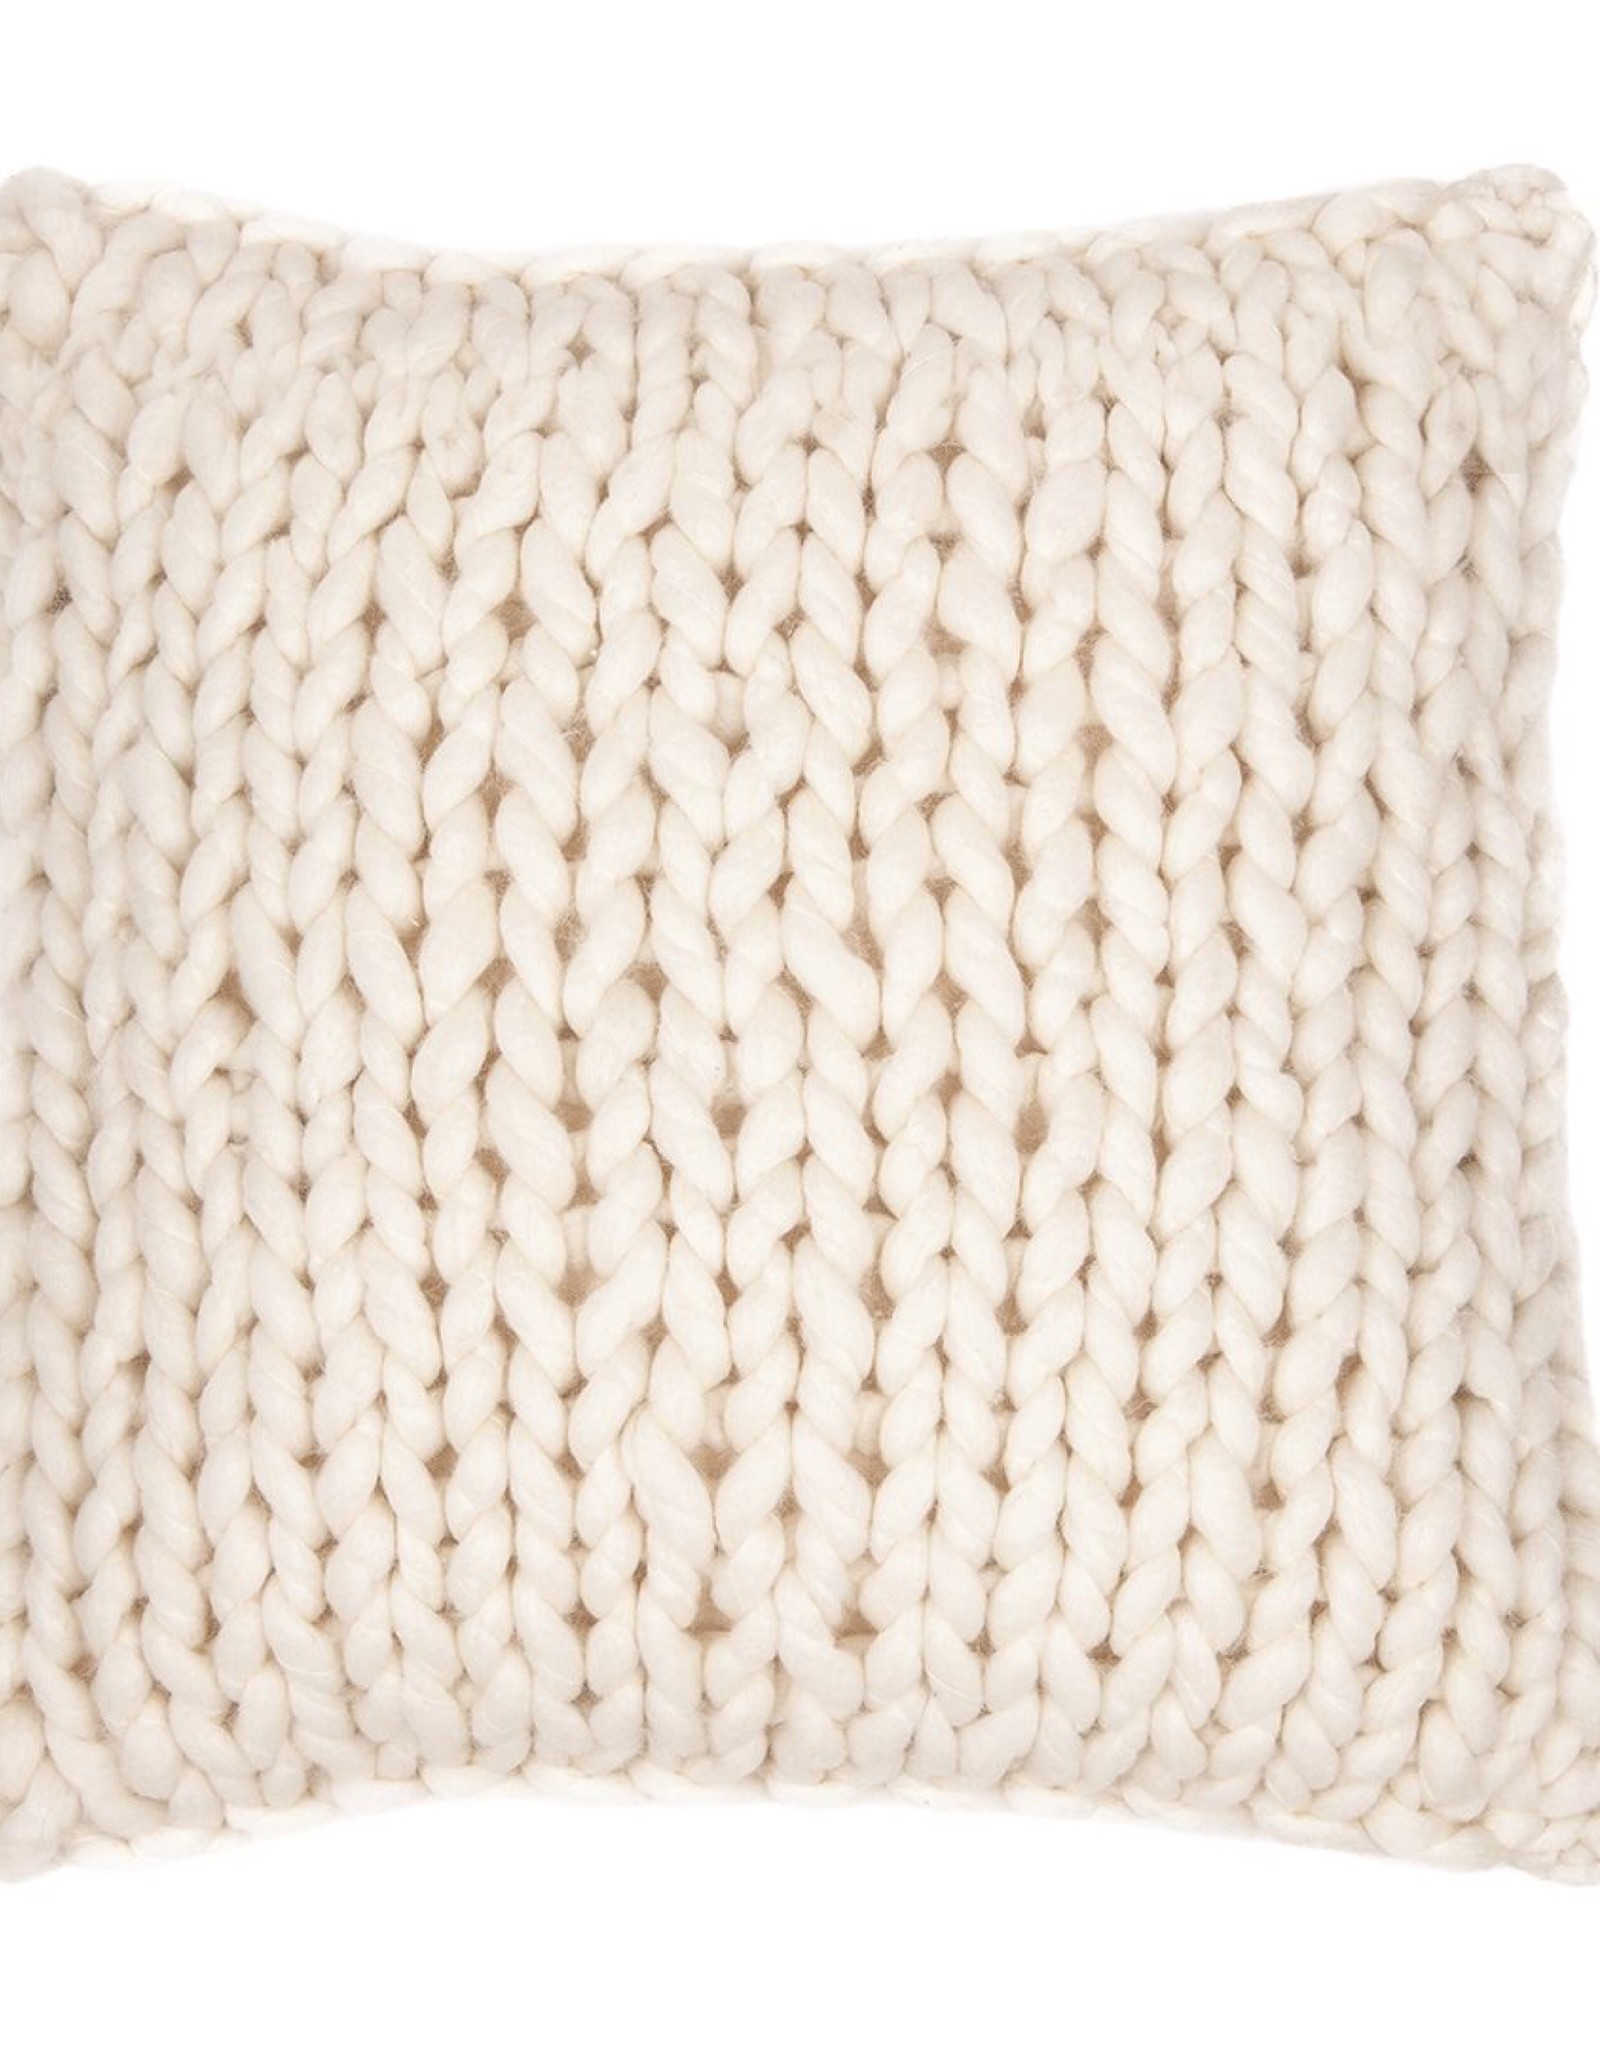 Cushions Brunelli Cocooning Chunky Knitted Ivory 18x18